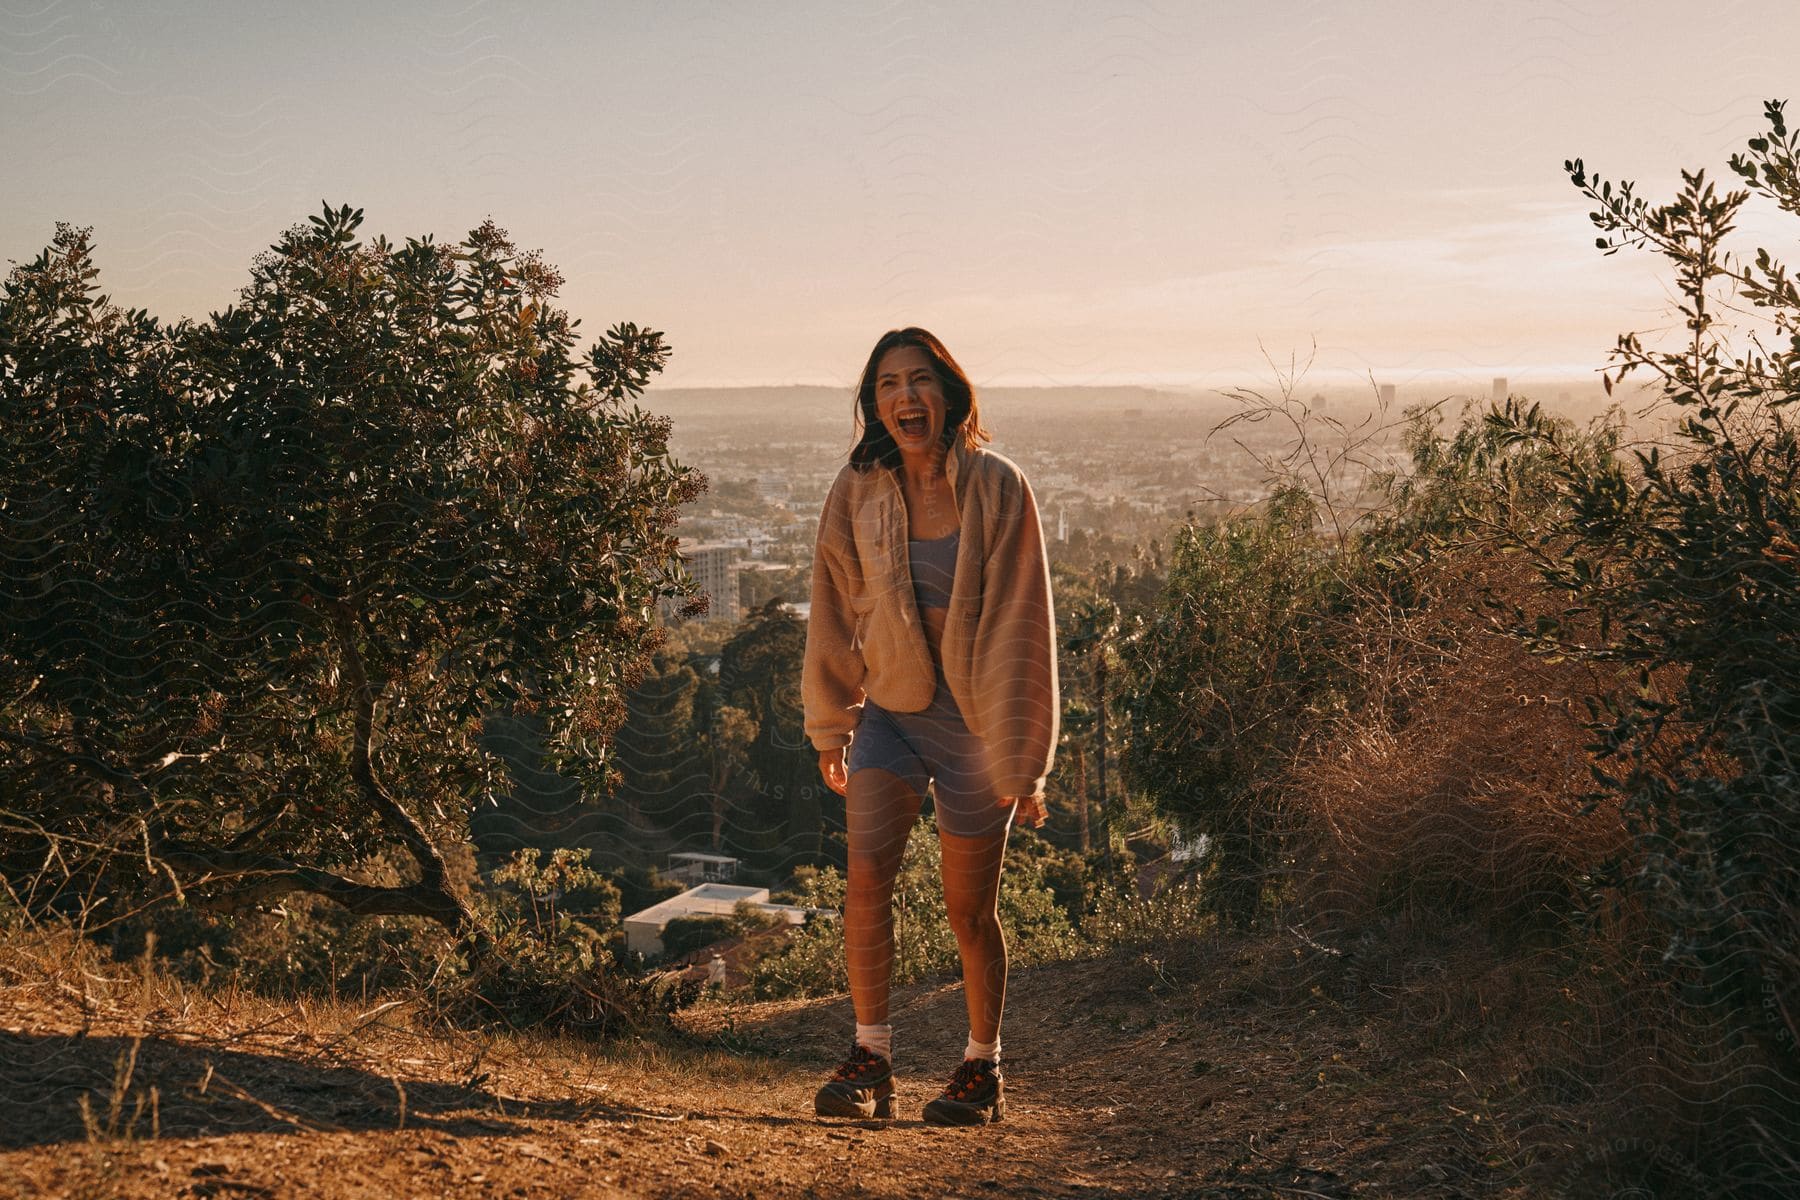 A woman wearing a white jacket, gray sports bra, and shorts walks uphill at sunset, with a city skyline in the background.